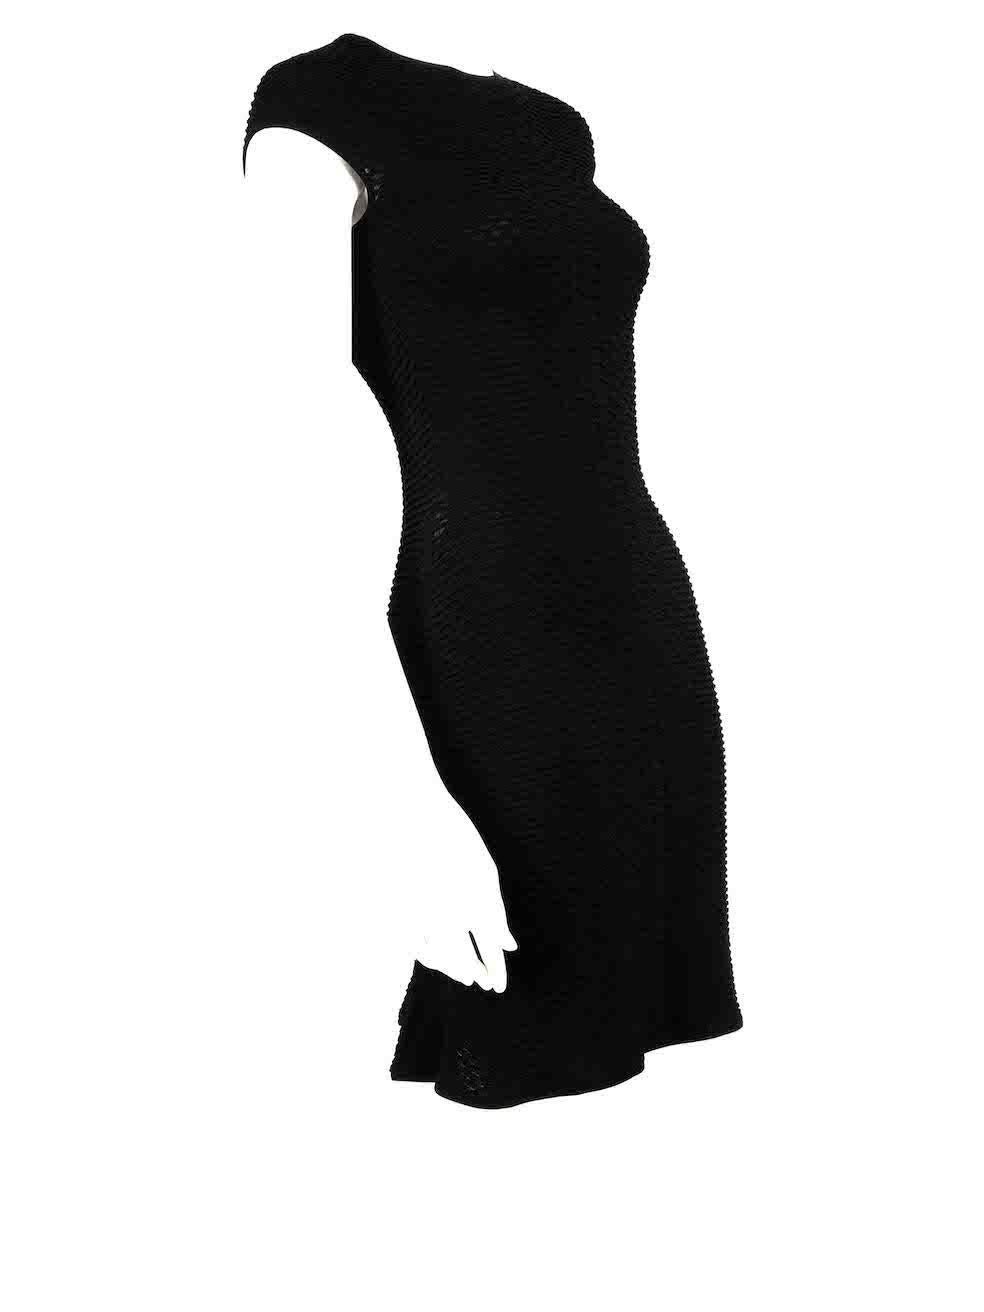 CONDITION is Never worn, with tags. No visible wear to dress is evident on this new Alexander McQueen designer resale item.
 
 
 
 Details
 
 
 Black
 
 Viscose
 
 Knit dress
 
 Bodycon
 
 Mini
 
 Short sleeves
 
 Round neck
 
 Stretchy
 
 Ruffle